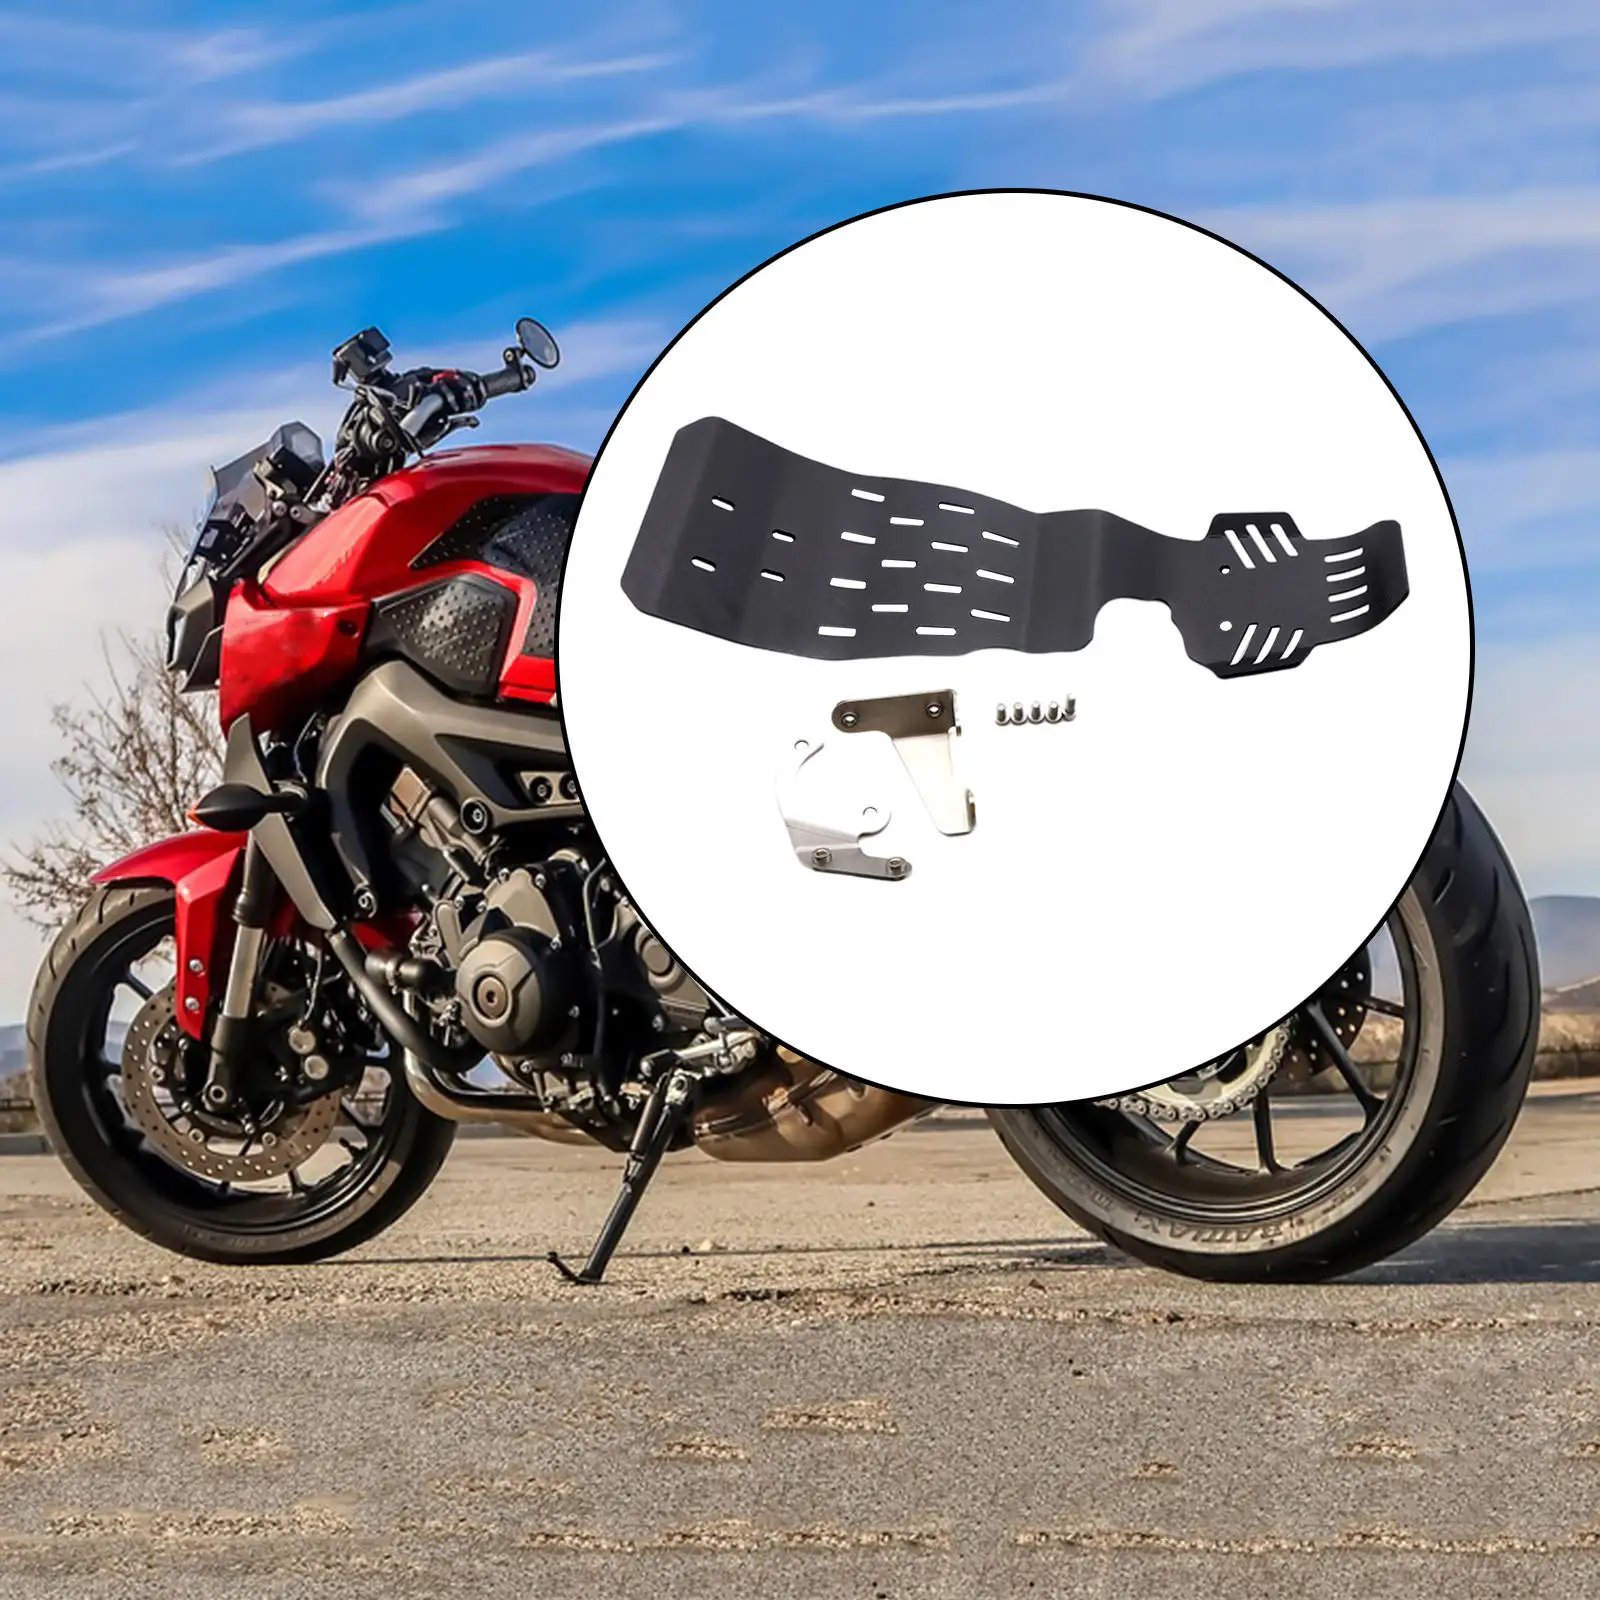 Motorcycle Engine Base Chassis Guard Cover Bumper Protector Skid Plate Fits for Ducati Scrambler 800 Scrambler800 2015-2021